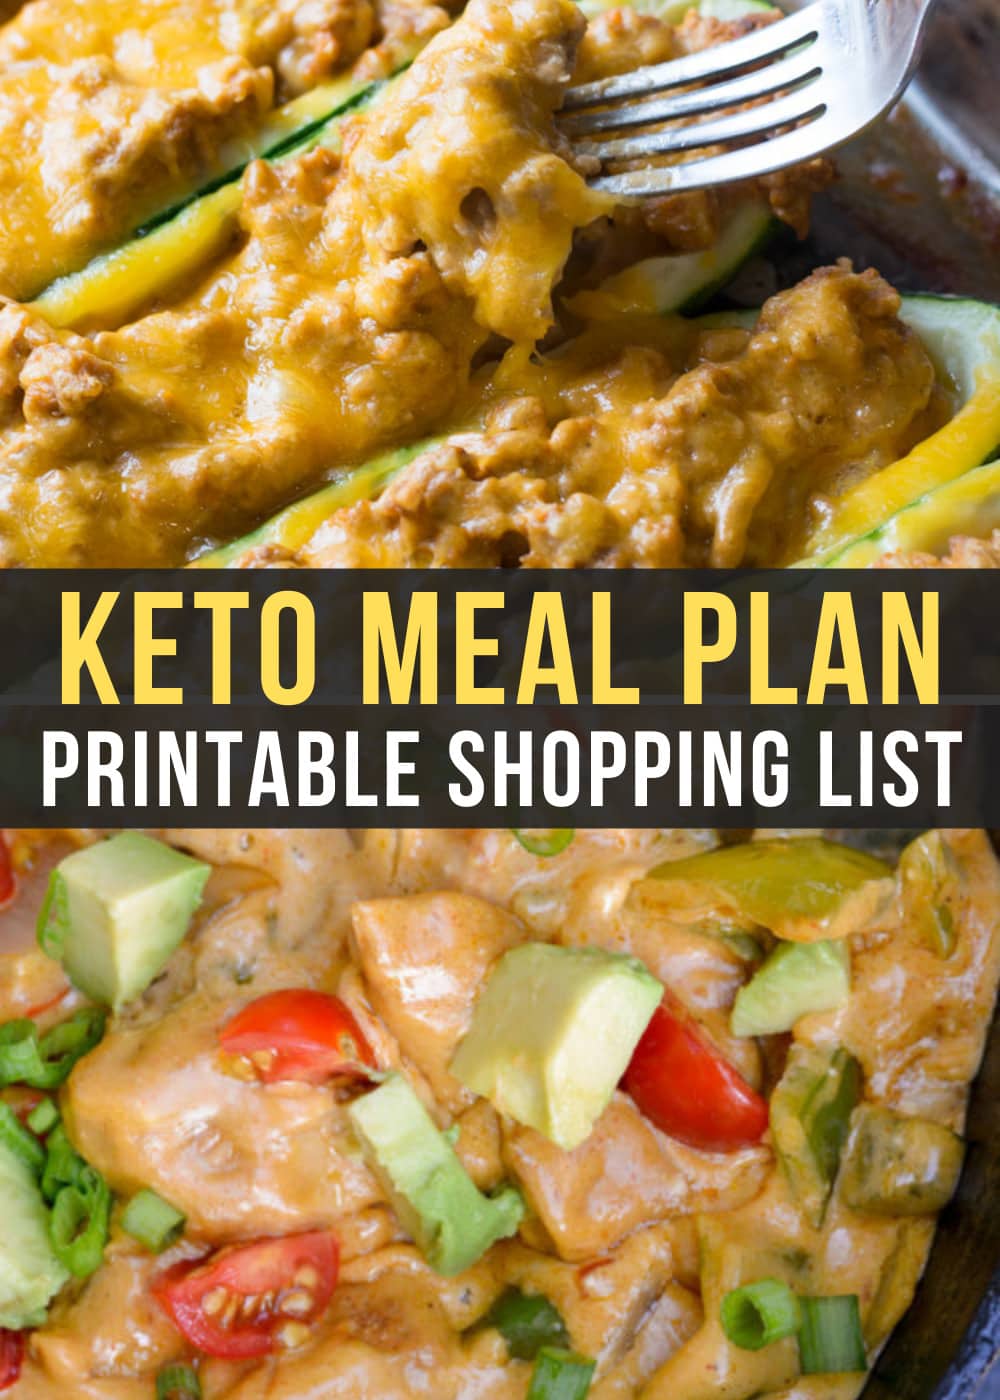 Week 44 of this easy keto meal plan includes 5 flavorful keto dinners and 1 low carb dessert. Net carb counts, serving amounts, keto meal prep tips, side suggestions, AND a keto shopping list are included!